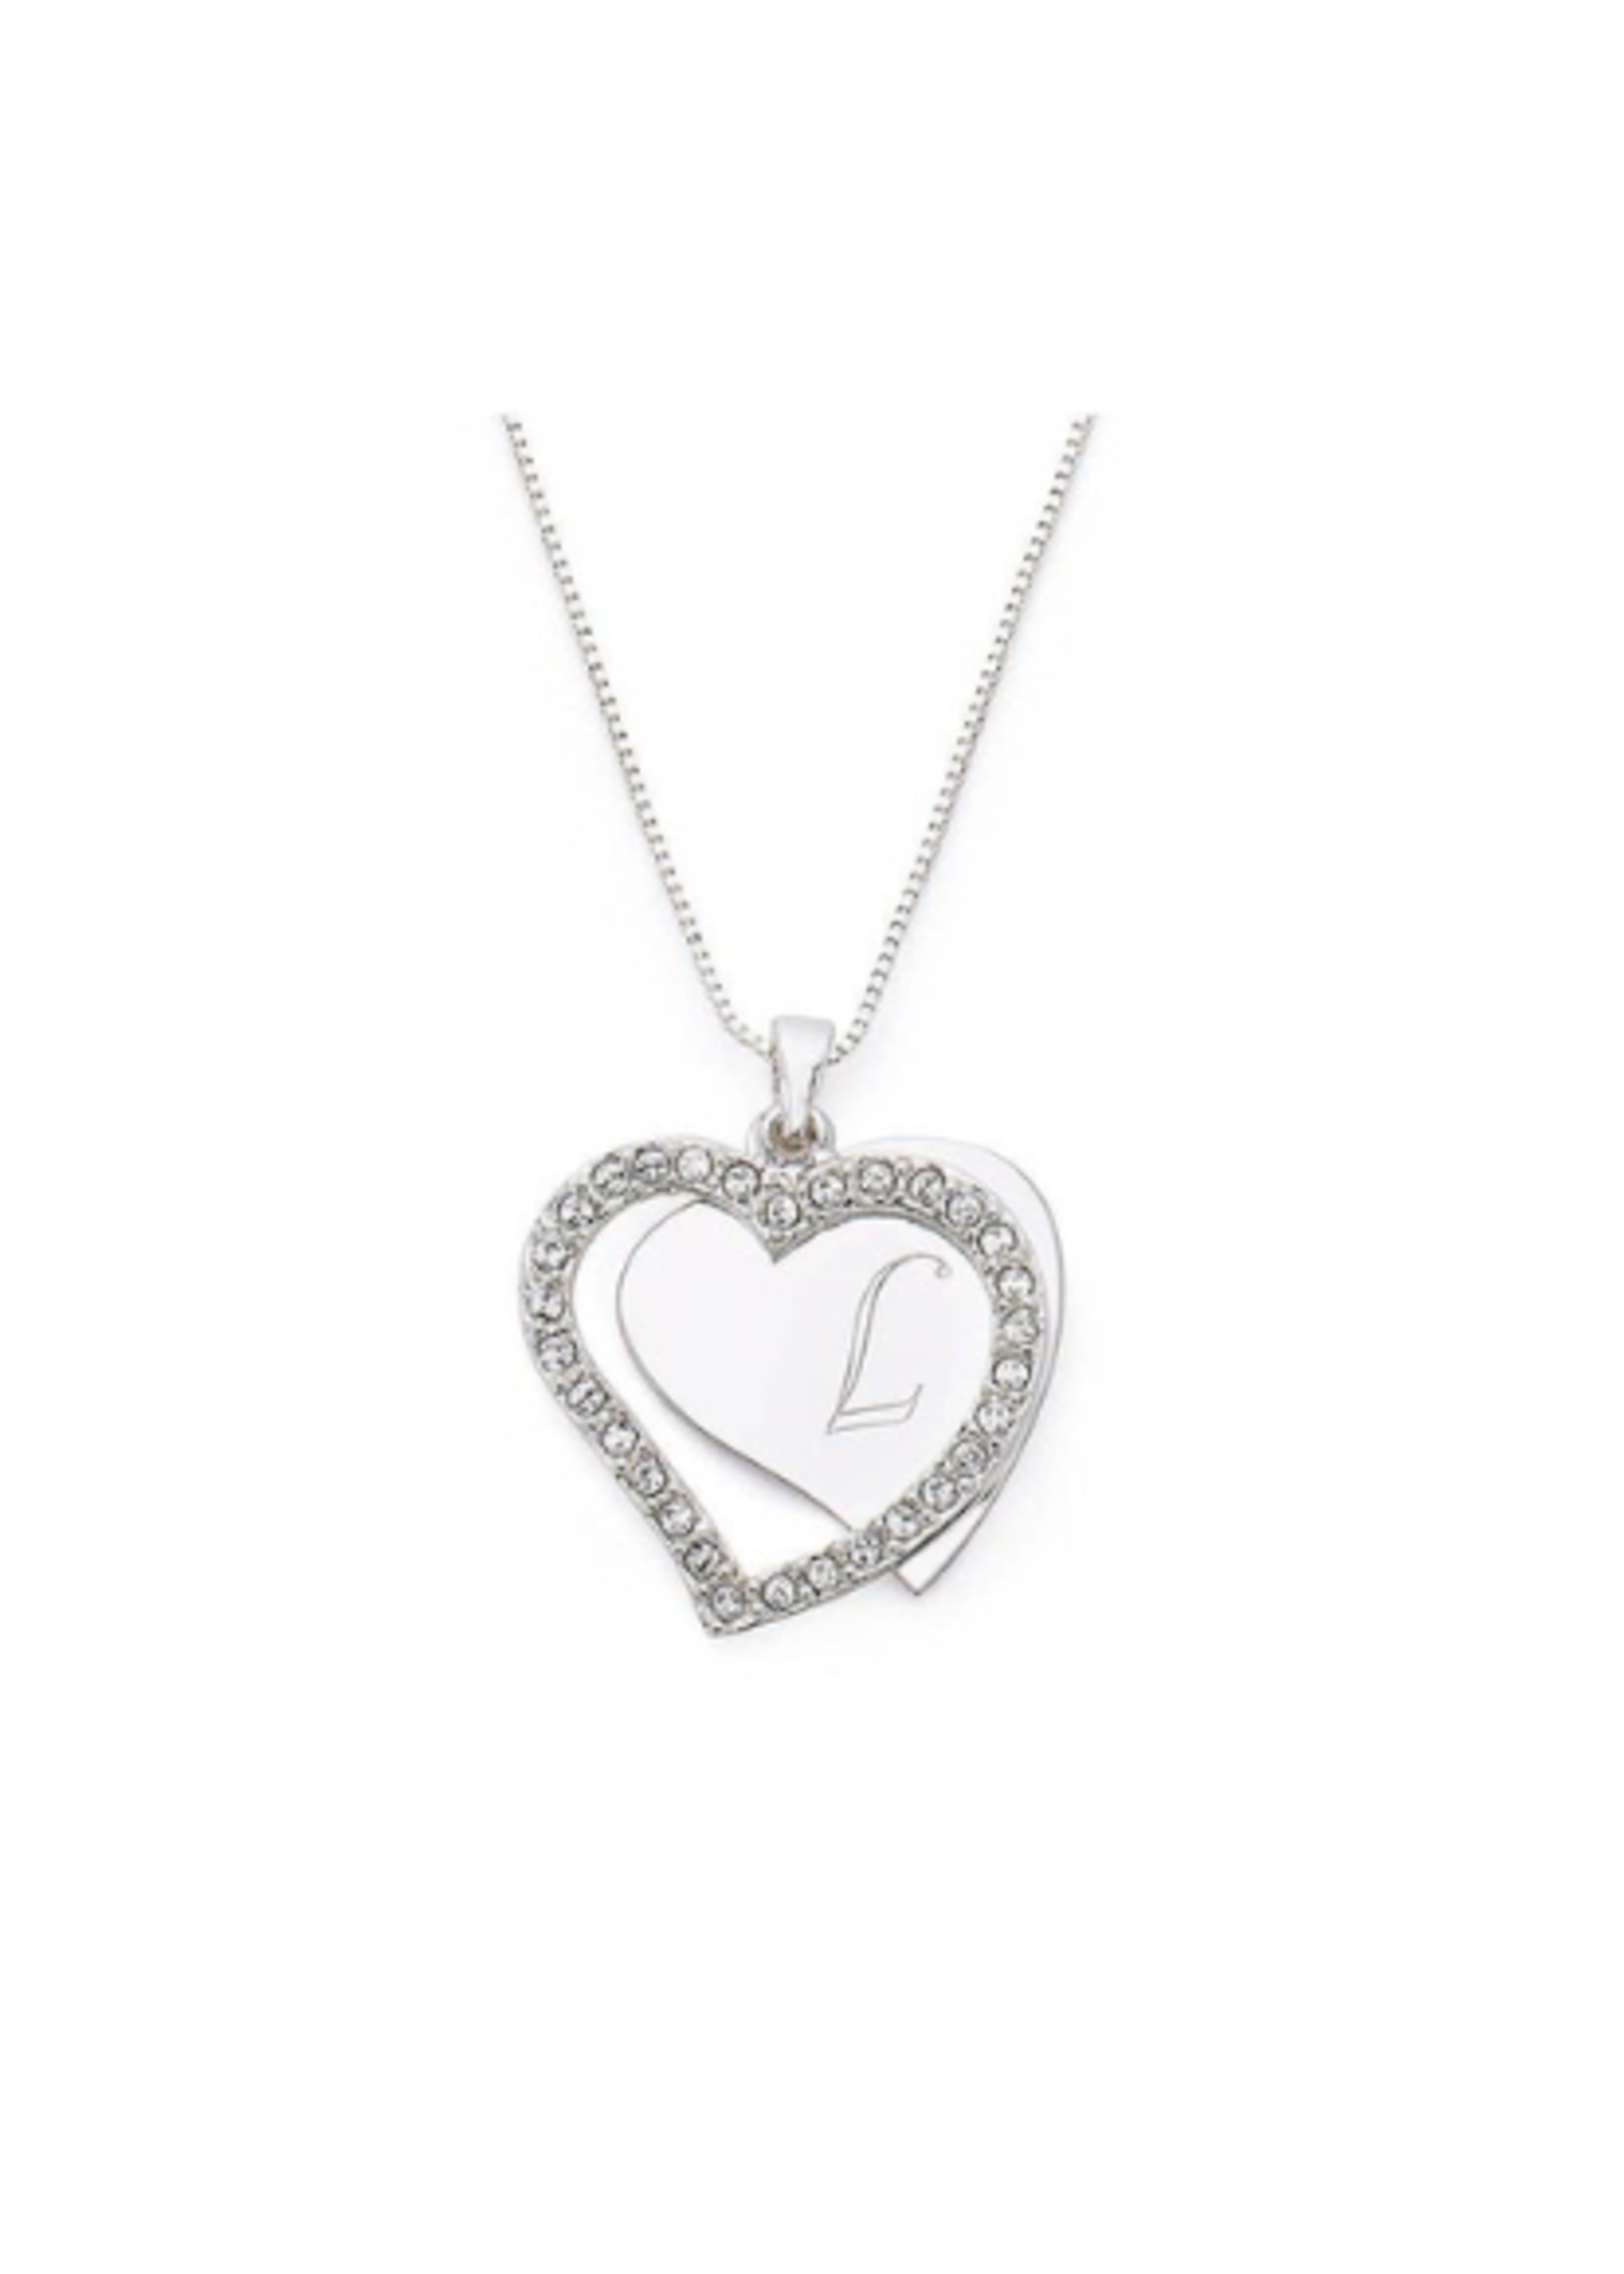 Silver Charm Heart Necklace